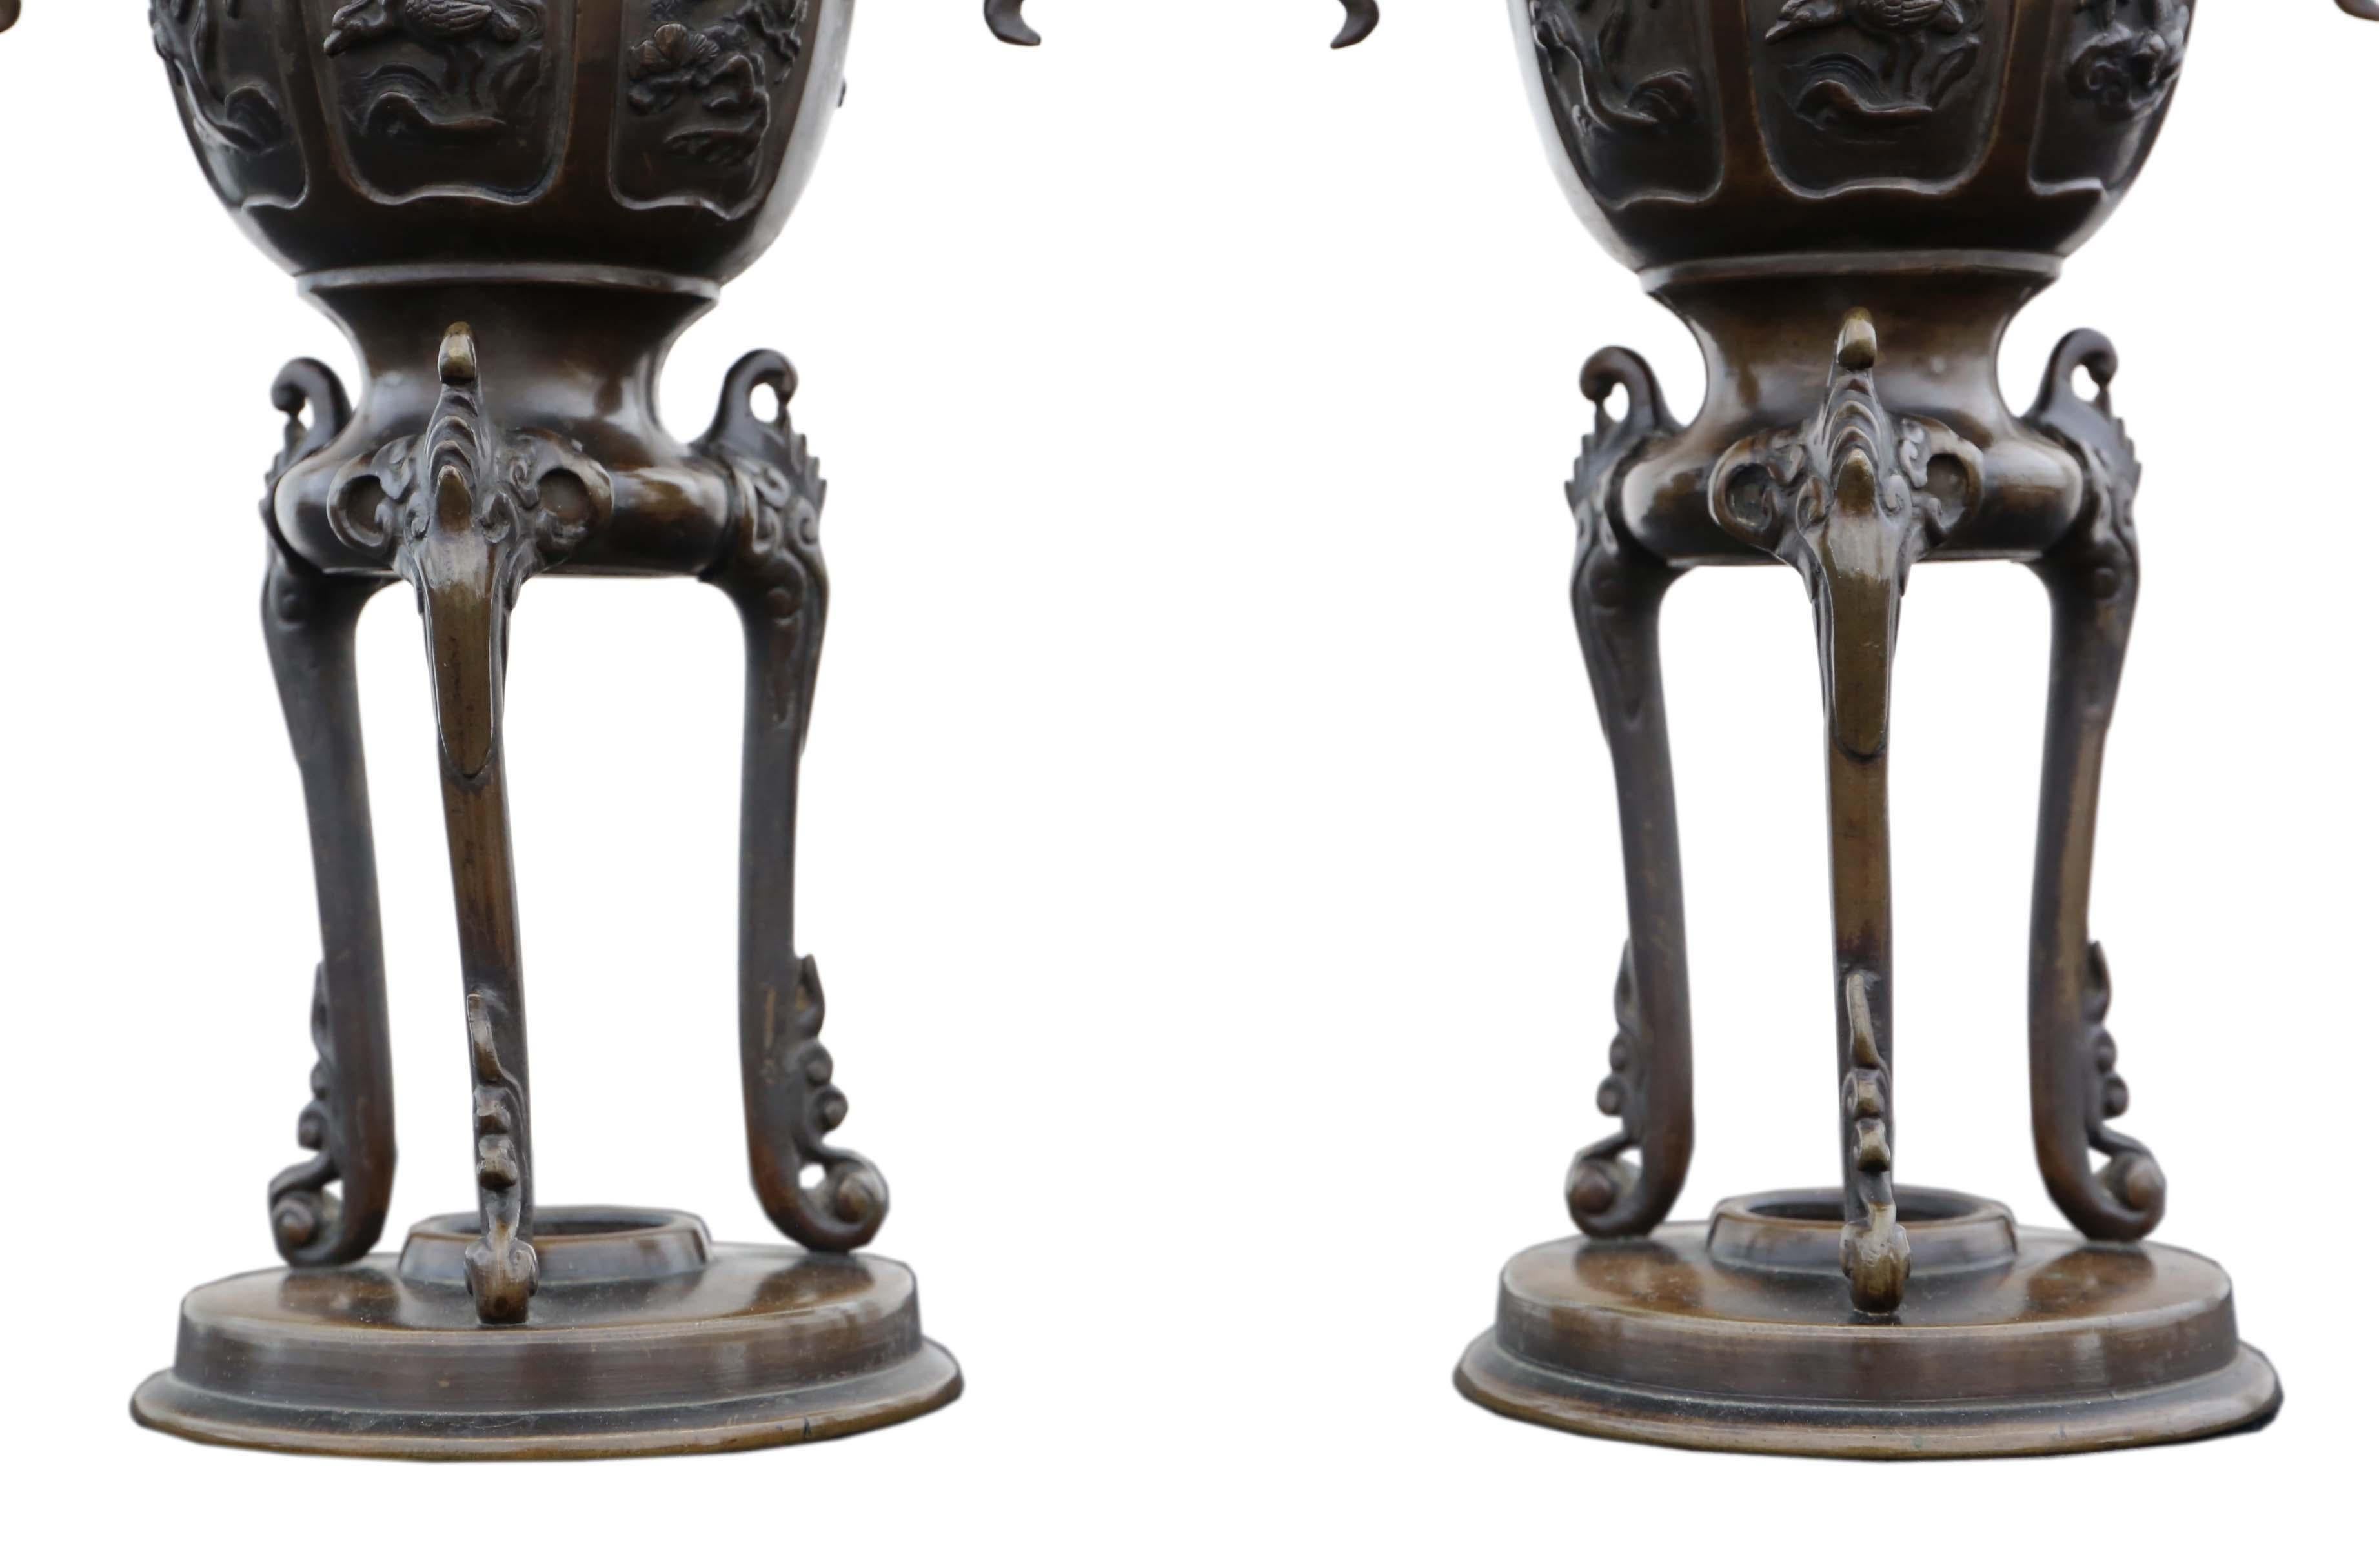 Large quality pair of Chinese bronze vases, 19th century with dragon handles.
Would look amazing in the right location. The very best color and patina.
Overall maximum dimensions: ~32cm high x 14cm diameter across handles. Weigh 1.6Kg each.
In